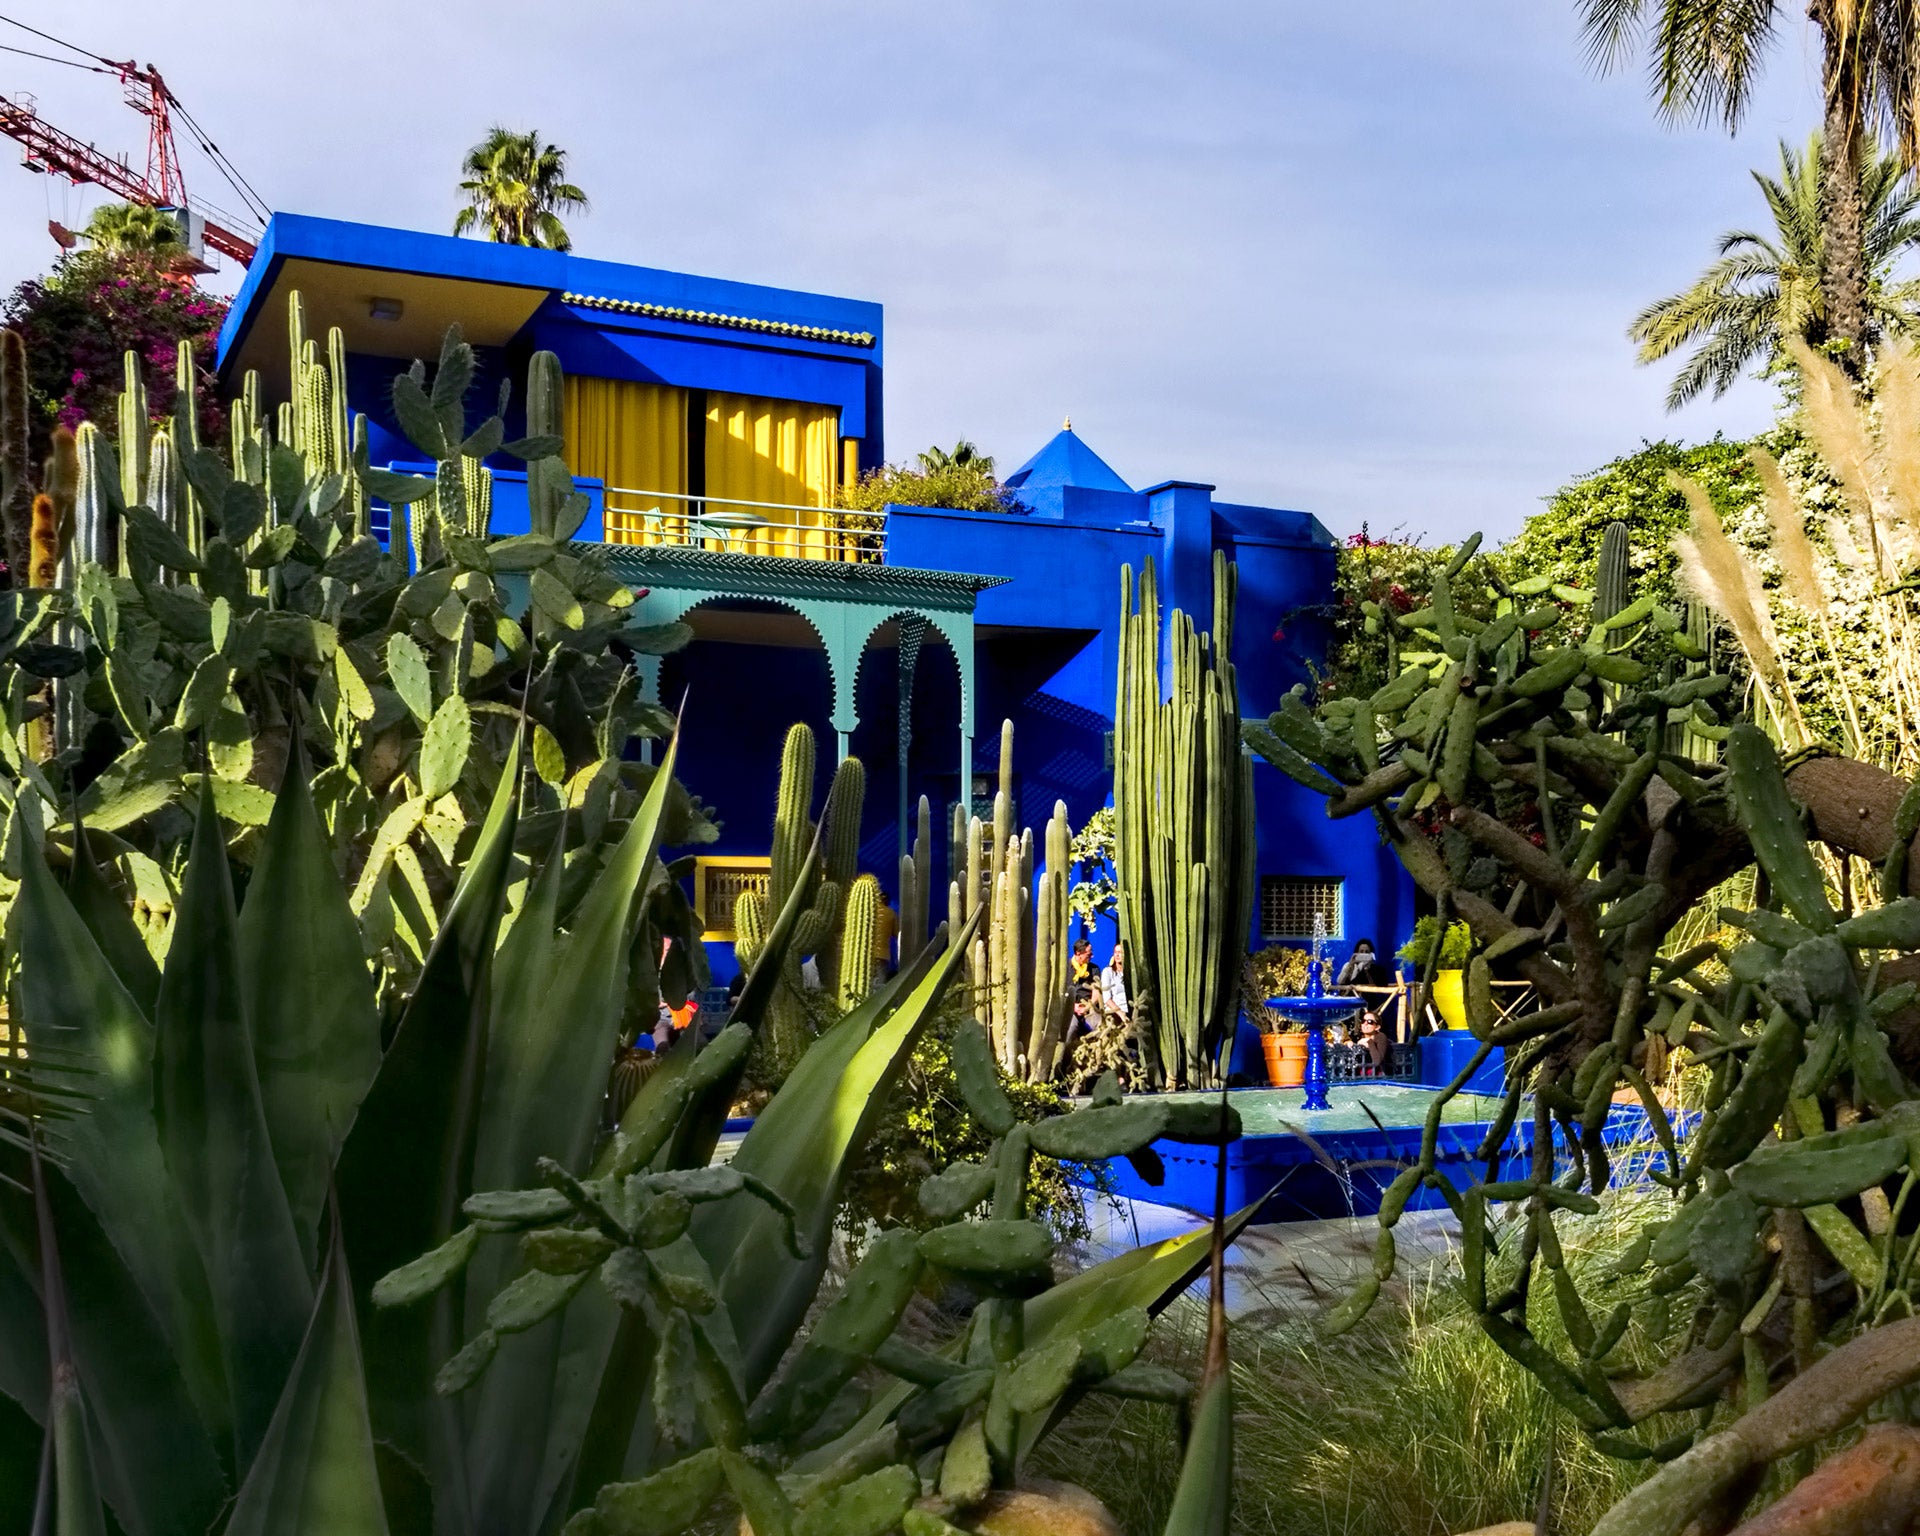 End the 2020 blues with Majorelle Blue